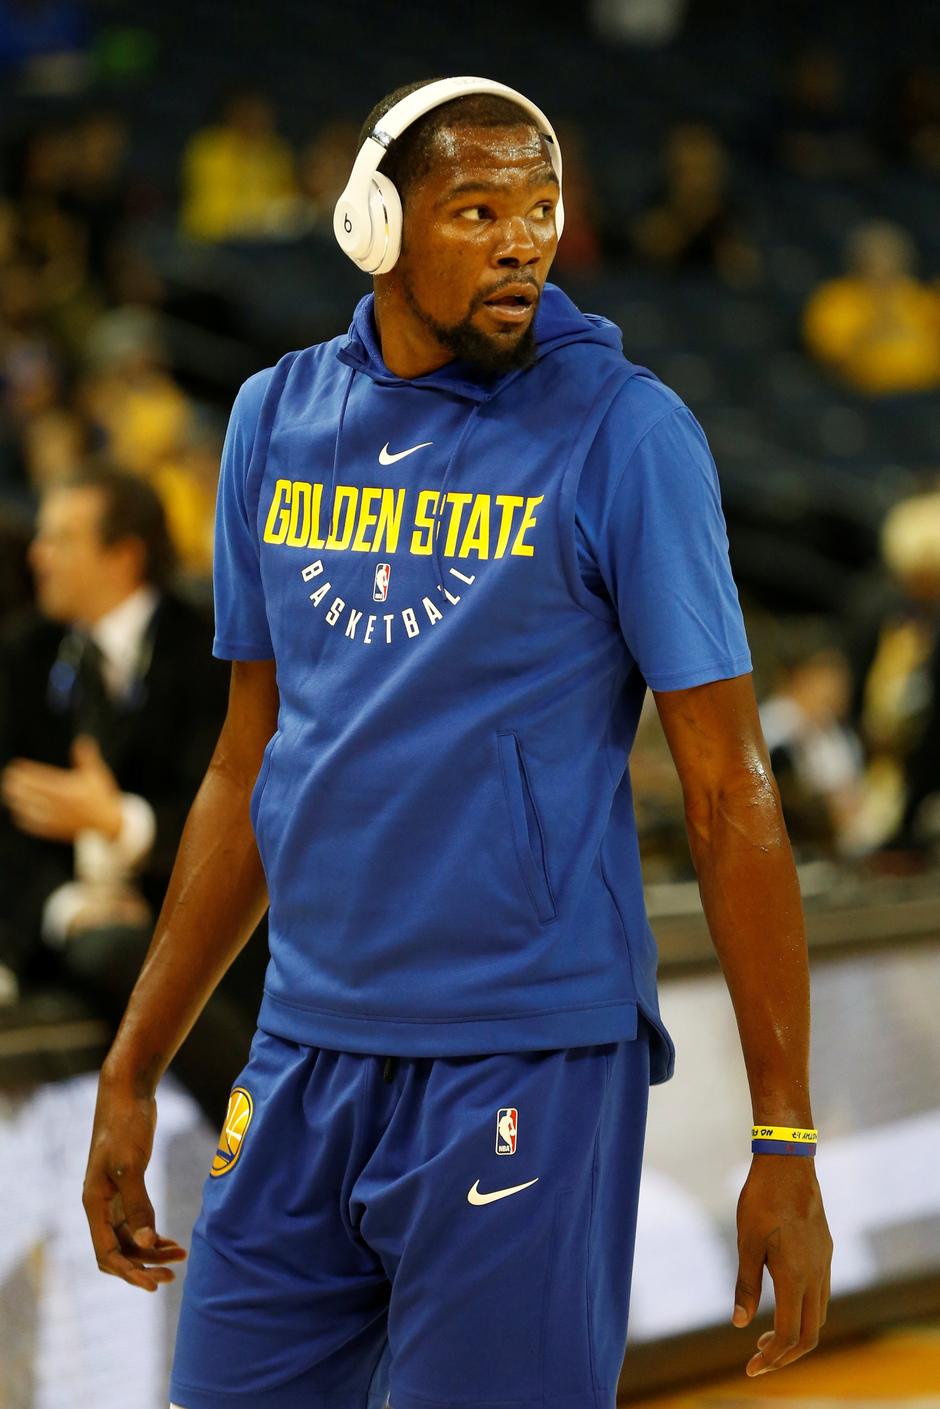 Kevin Durant | Author: STEPHEN LAM/REUTERS/PIXSELL